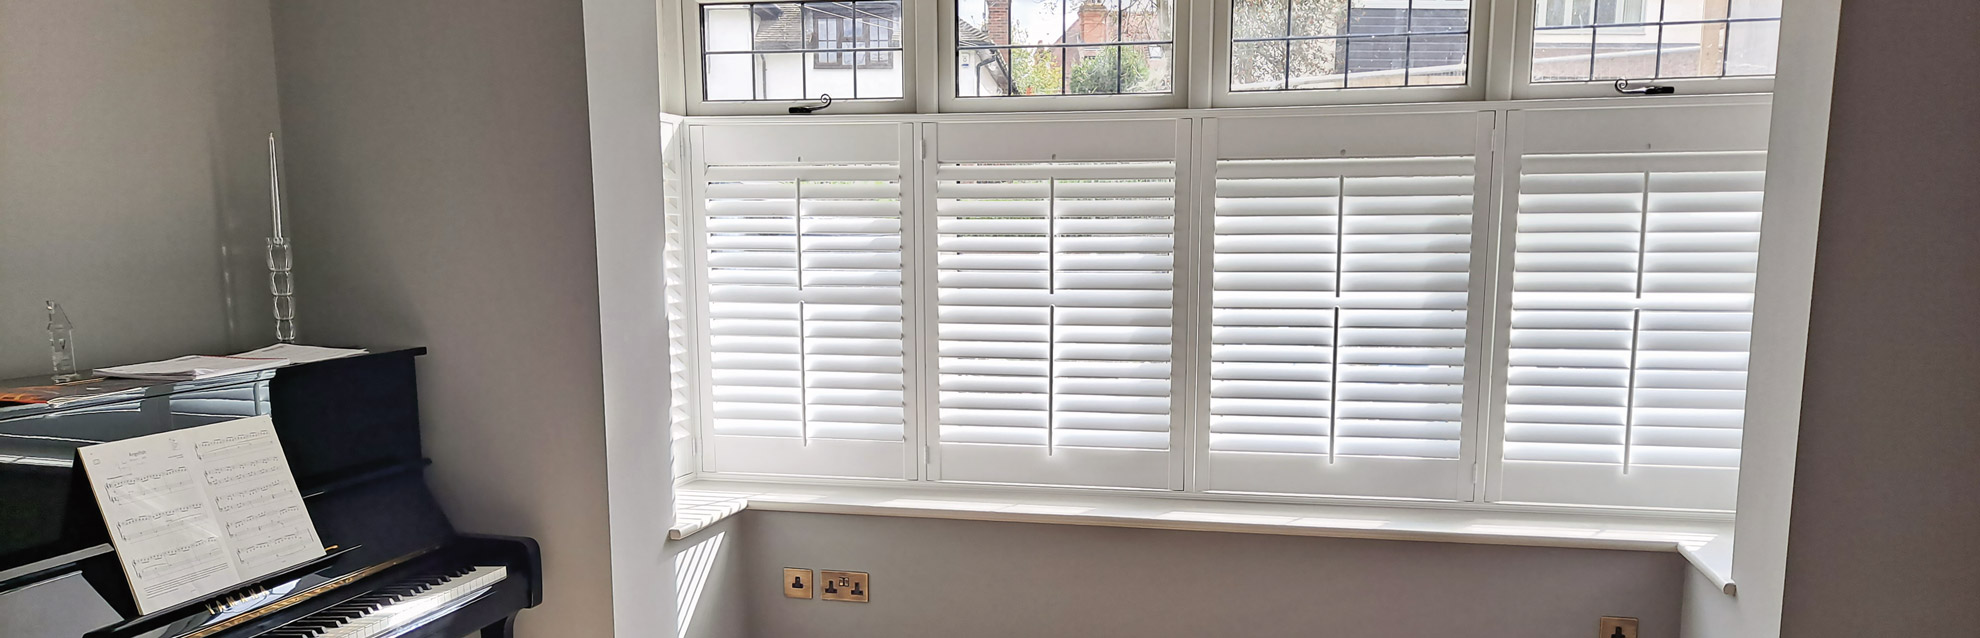 White cafe style shutters in piano room window